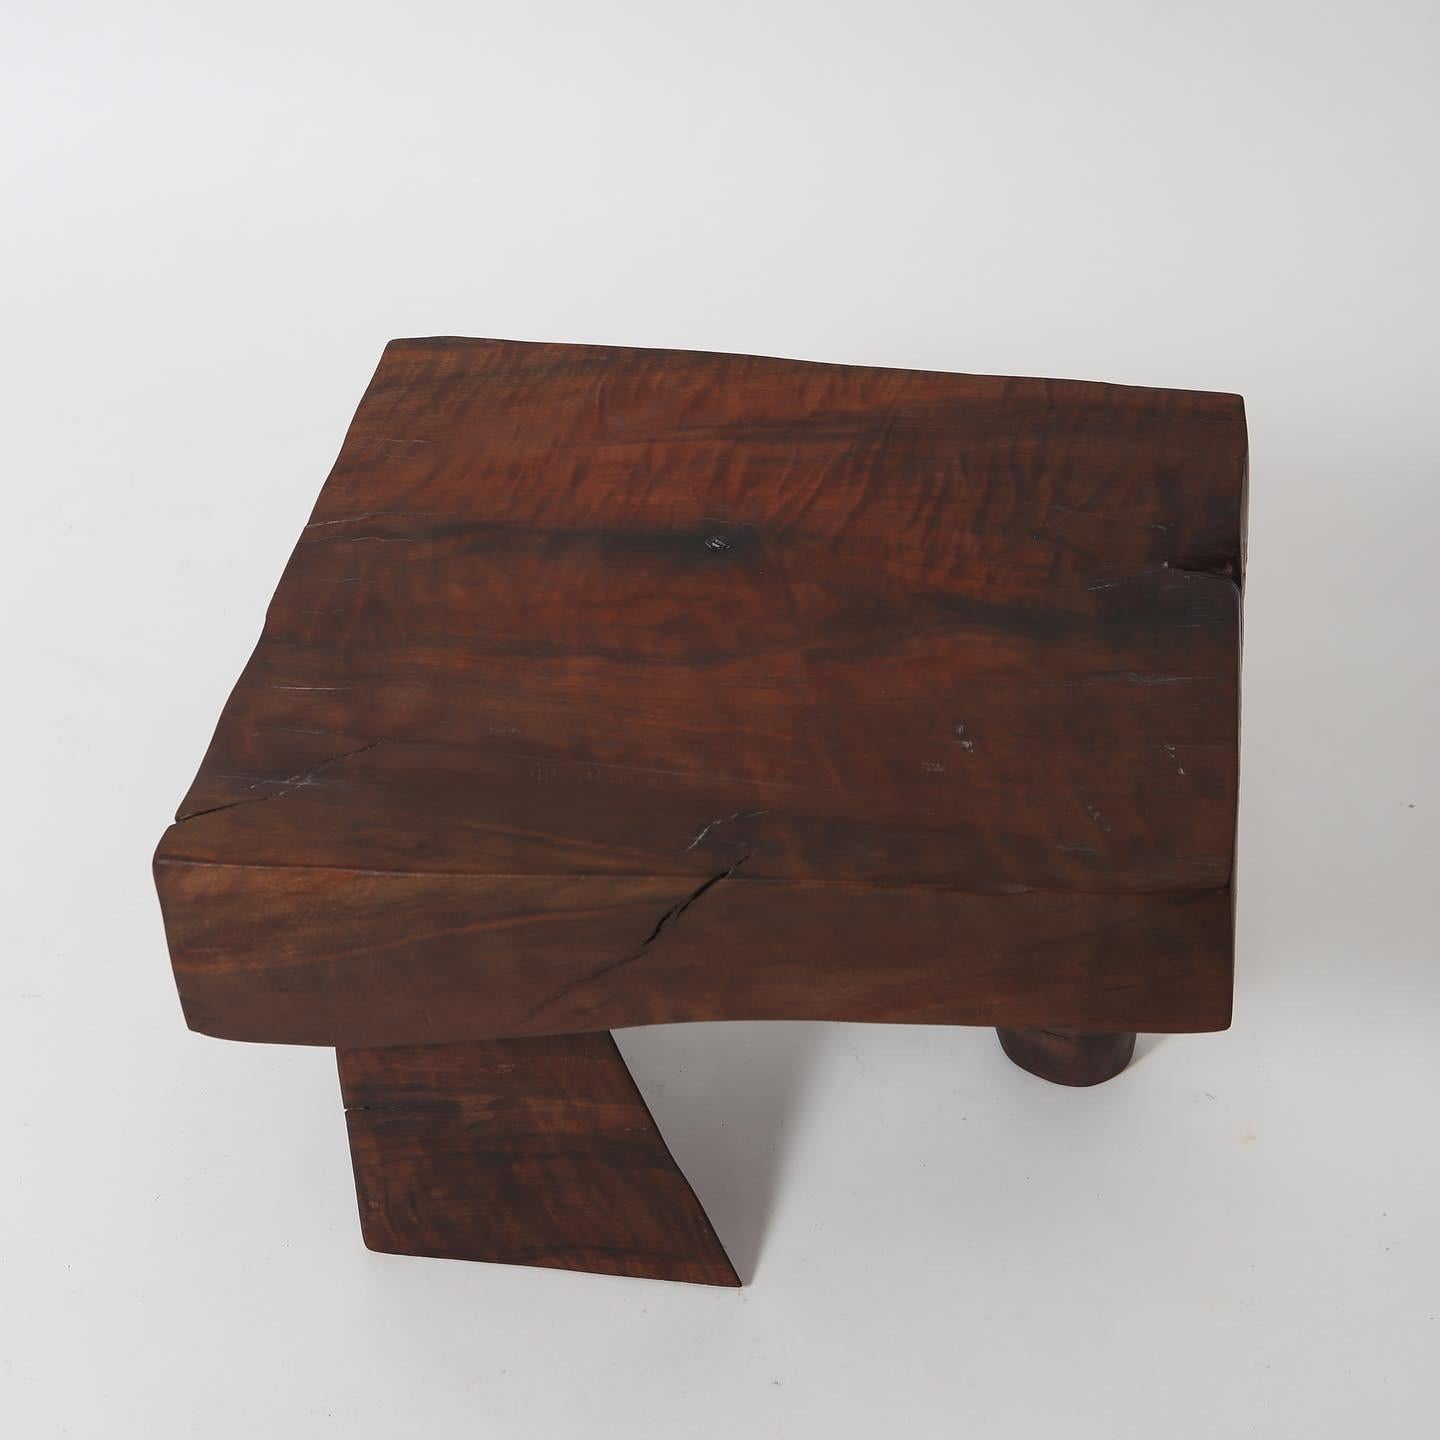 An earlier piece by artist Vince Skelly hand carved from a solid piece of black walnut. In the tradition of Leroy Setziol or J.B Blunk, Skelly’s work has become quite difficult to acquire. Work completed 2019, Portland, OR.